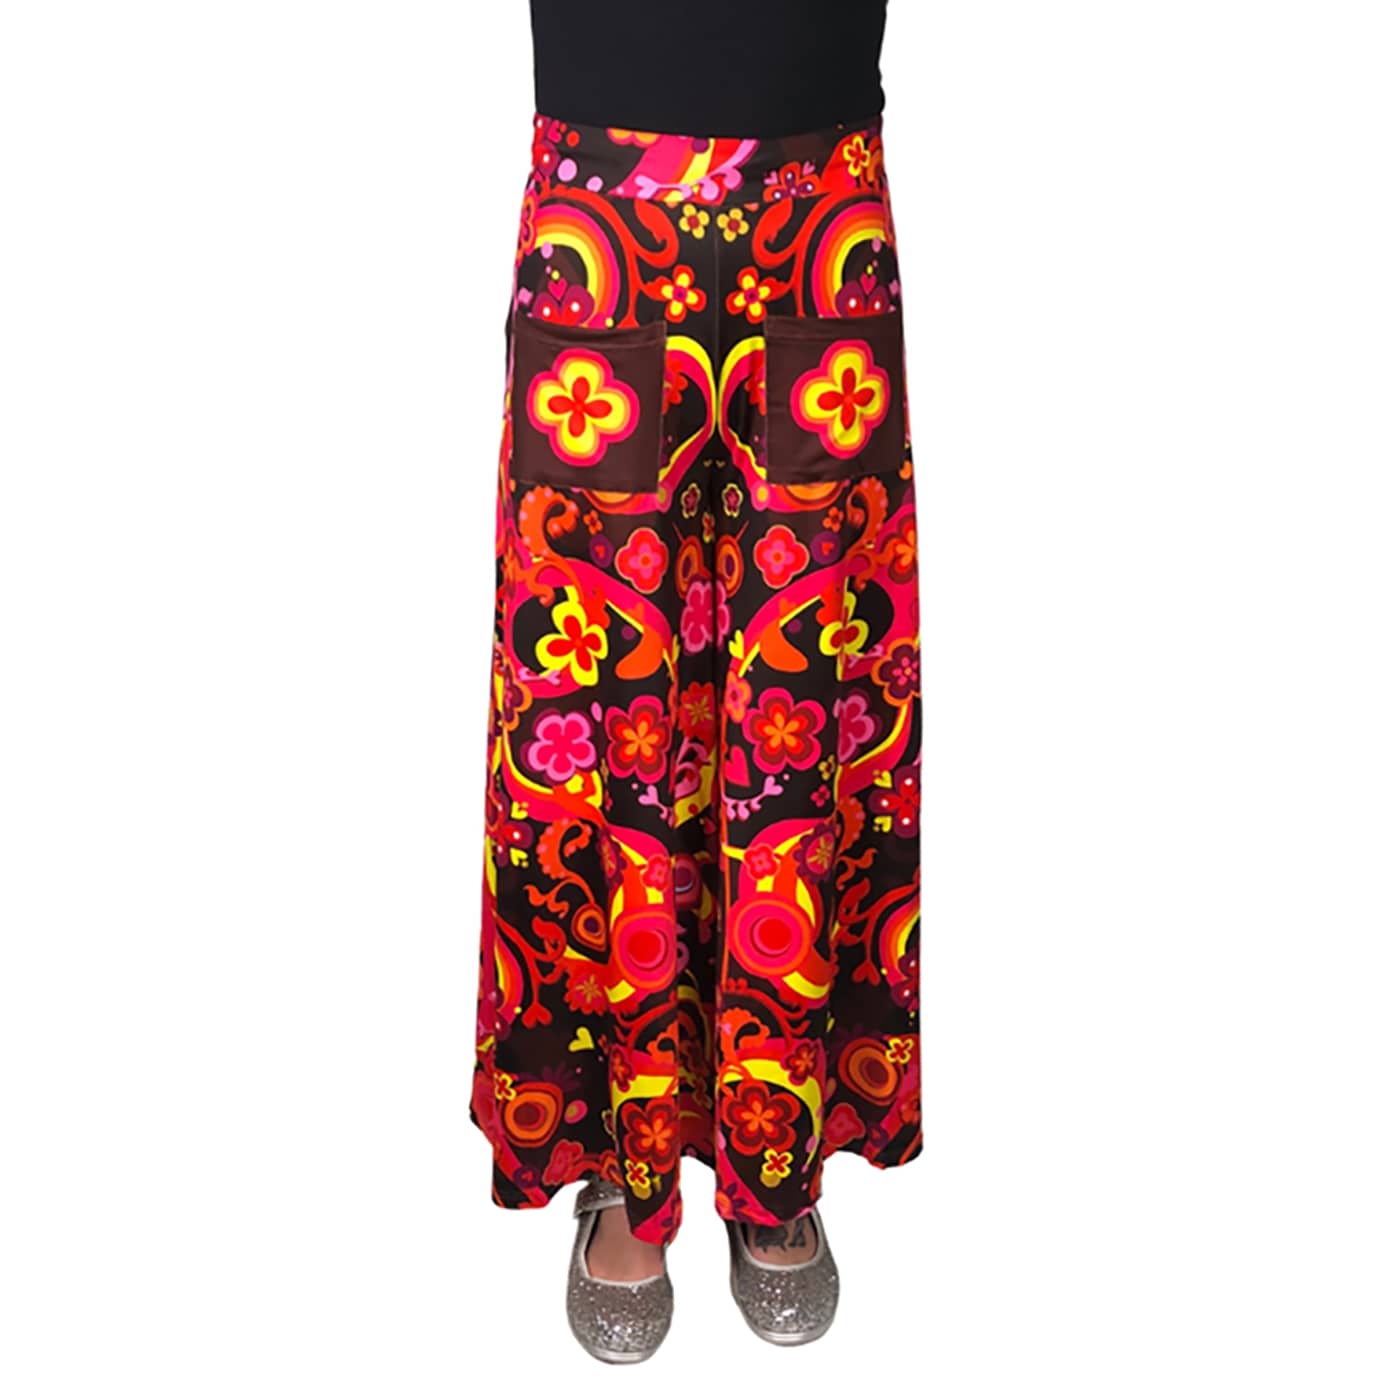 Groovy Days Wide Leg Pants by RainbowsAndFairies.com (Woodstock - Flower Power - Psychedelic - Hippy - Pallazo Pants - Flares Bell Bottoms - Vintage Inspired - Pants With Pockets) - SKU: CL_WIDEL_GROOV_DAY - Pic 01